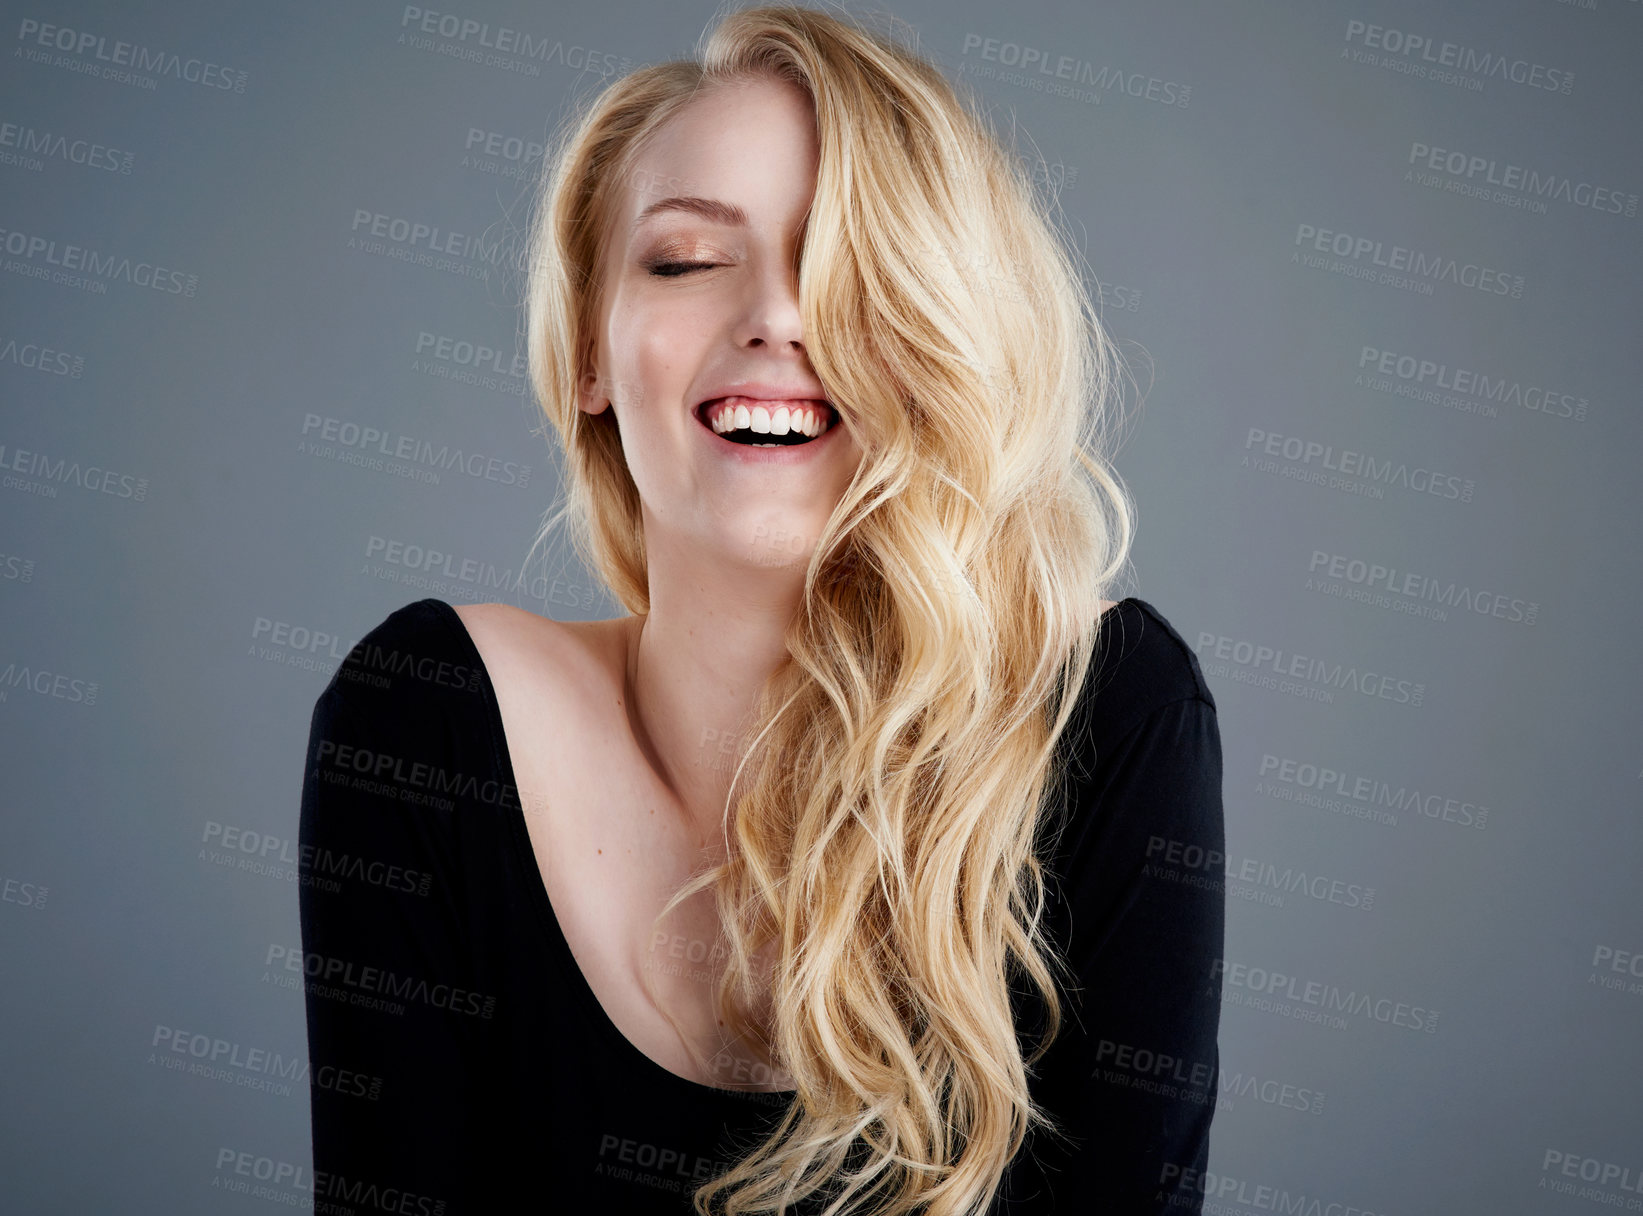 Buy stock photo Studio portrait of an attractive young woman with beautiful long blonde hair laughing against a gray background